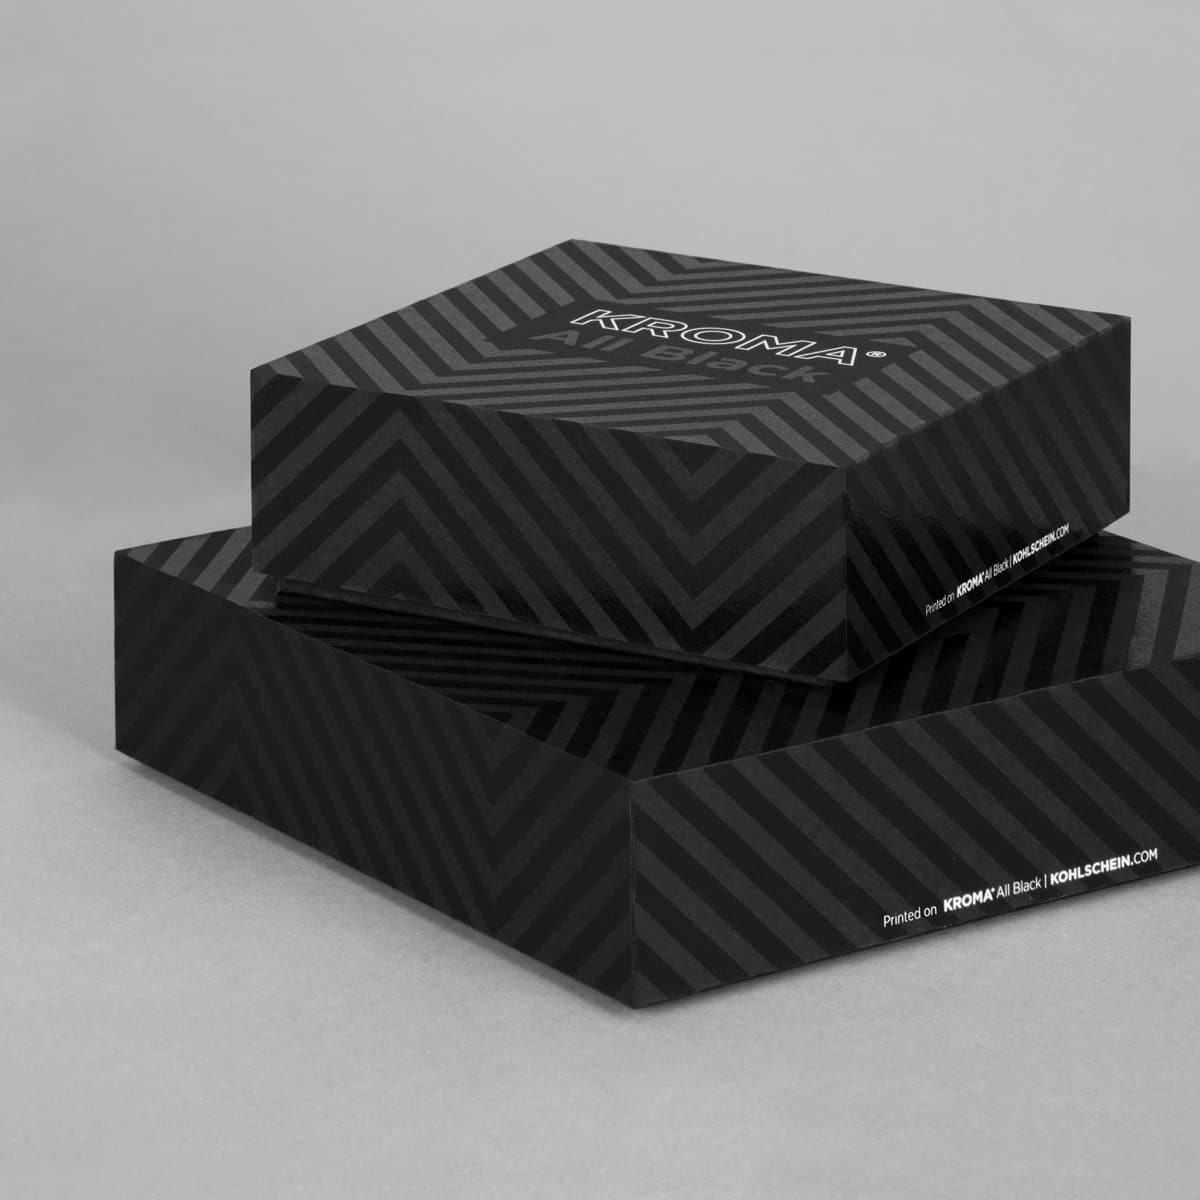 Screen printed boxes in KROMA All Black